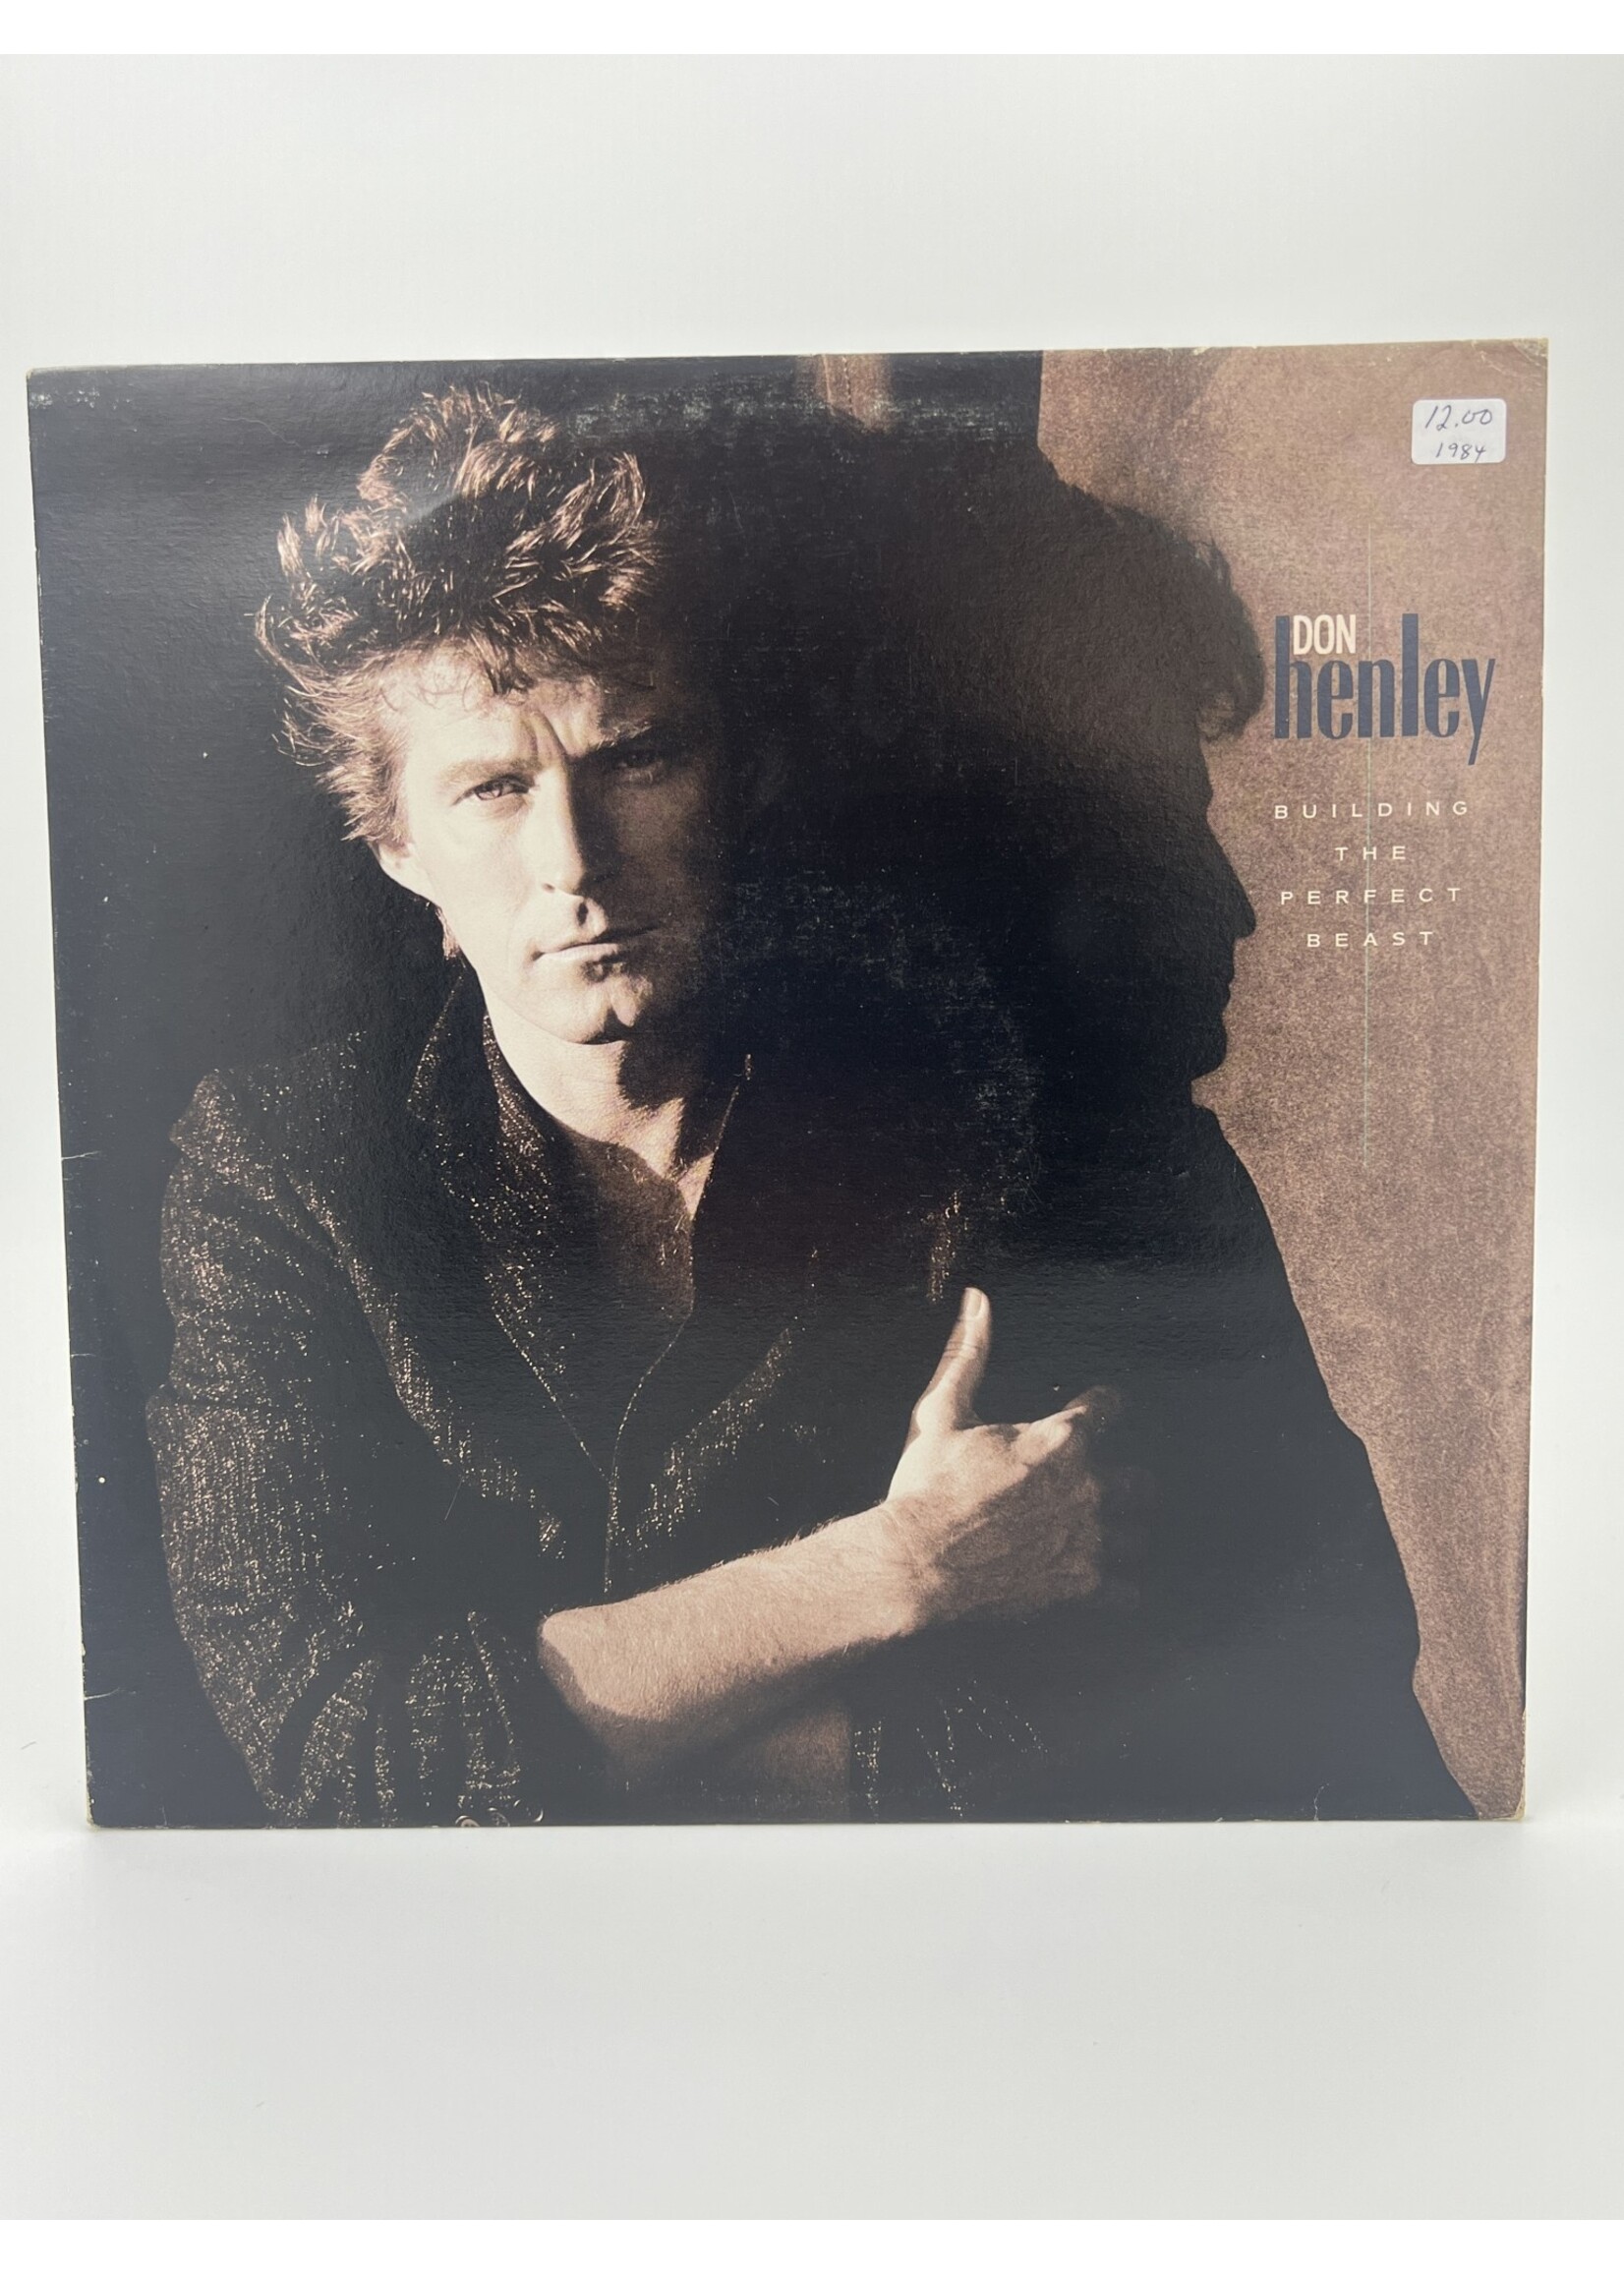 LP   Don Henley Building The Perfect Beast LP Record